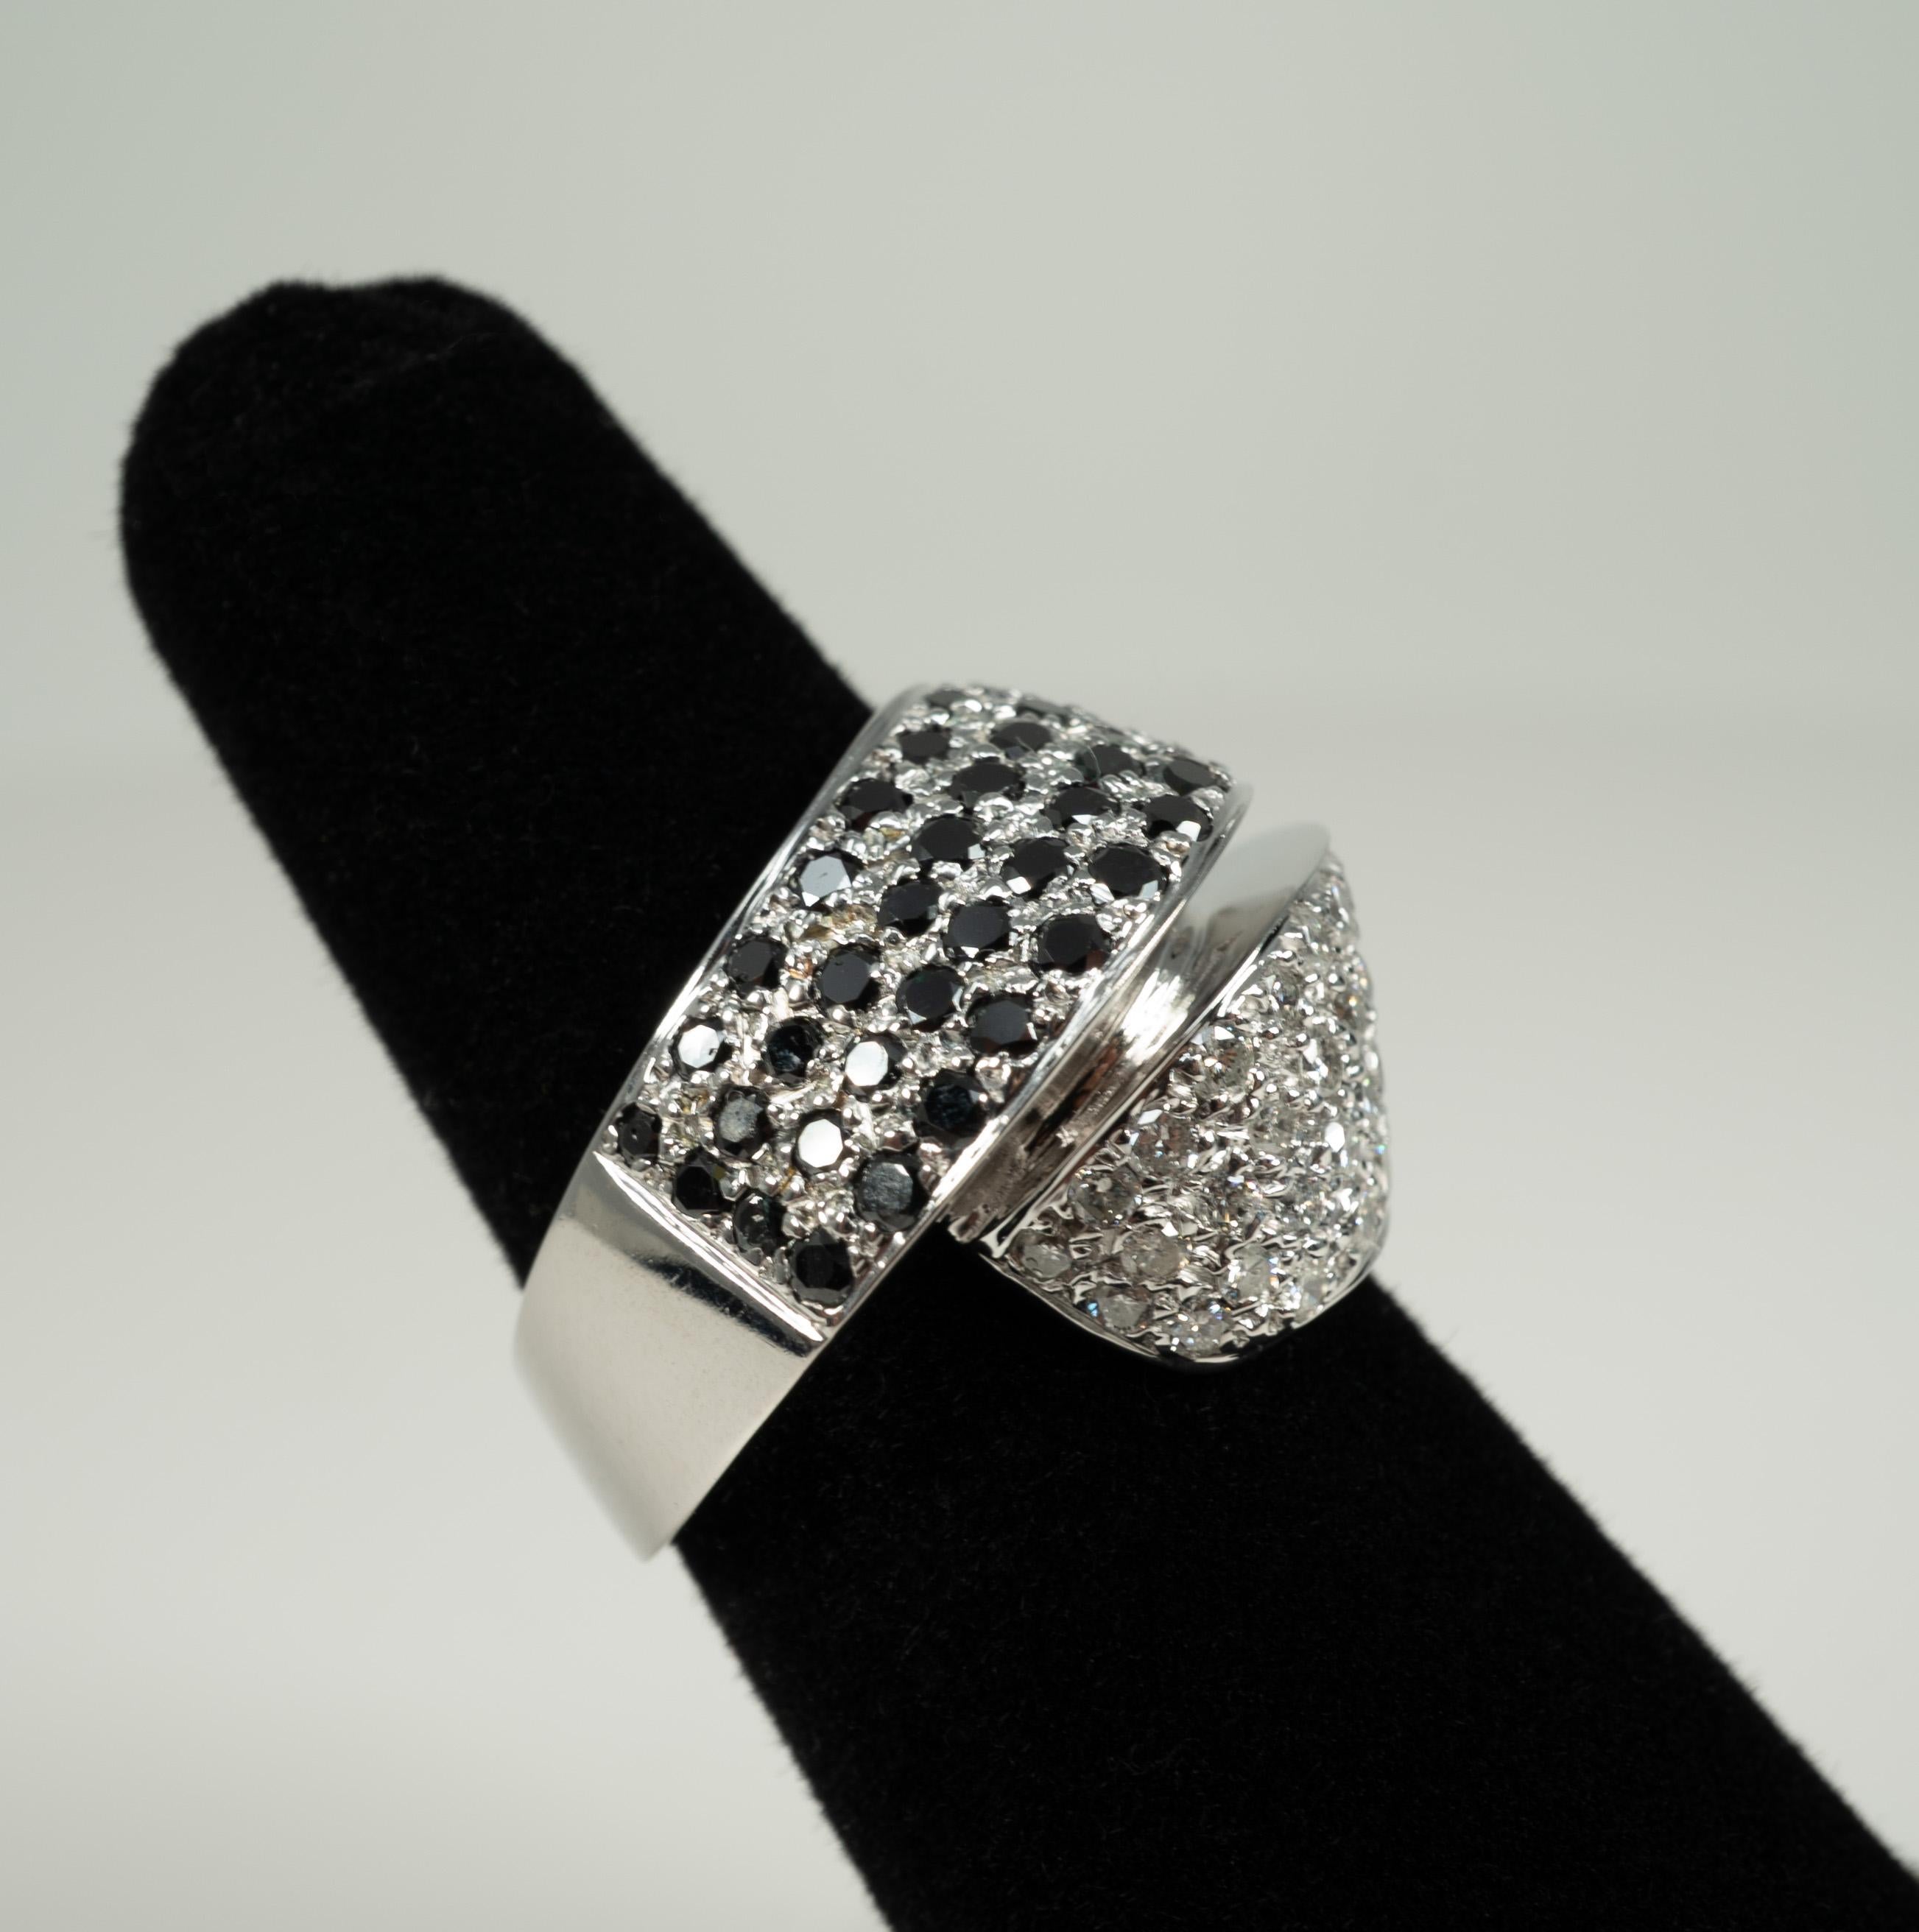 In 18 karat white gold, this beautiful by-pass ring features black and colorless diamonds!  